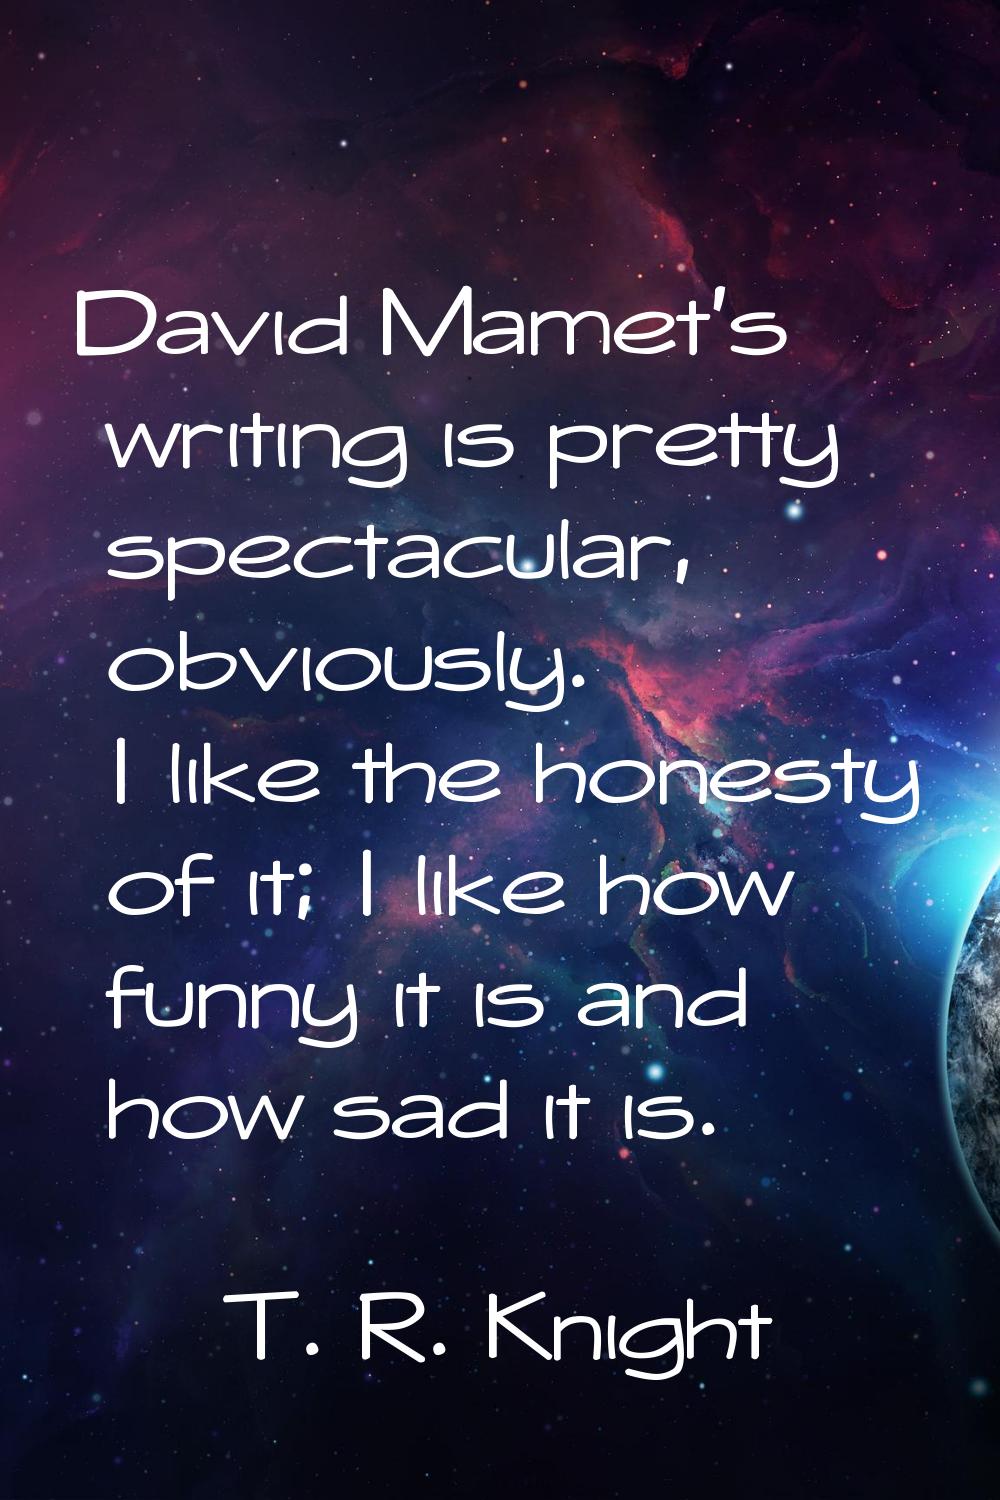 David Mamet's writing is pretty spectacular, obviously. I like the honesty of it; I like how funny 